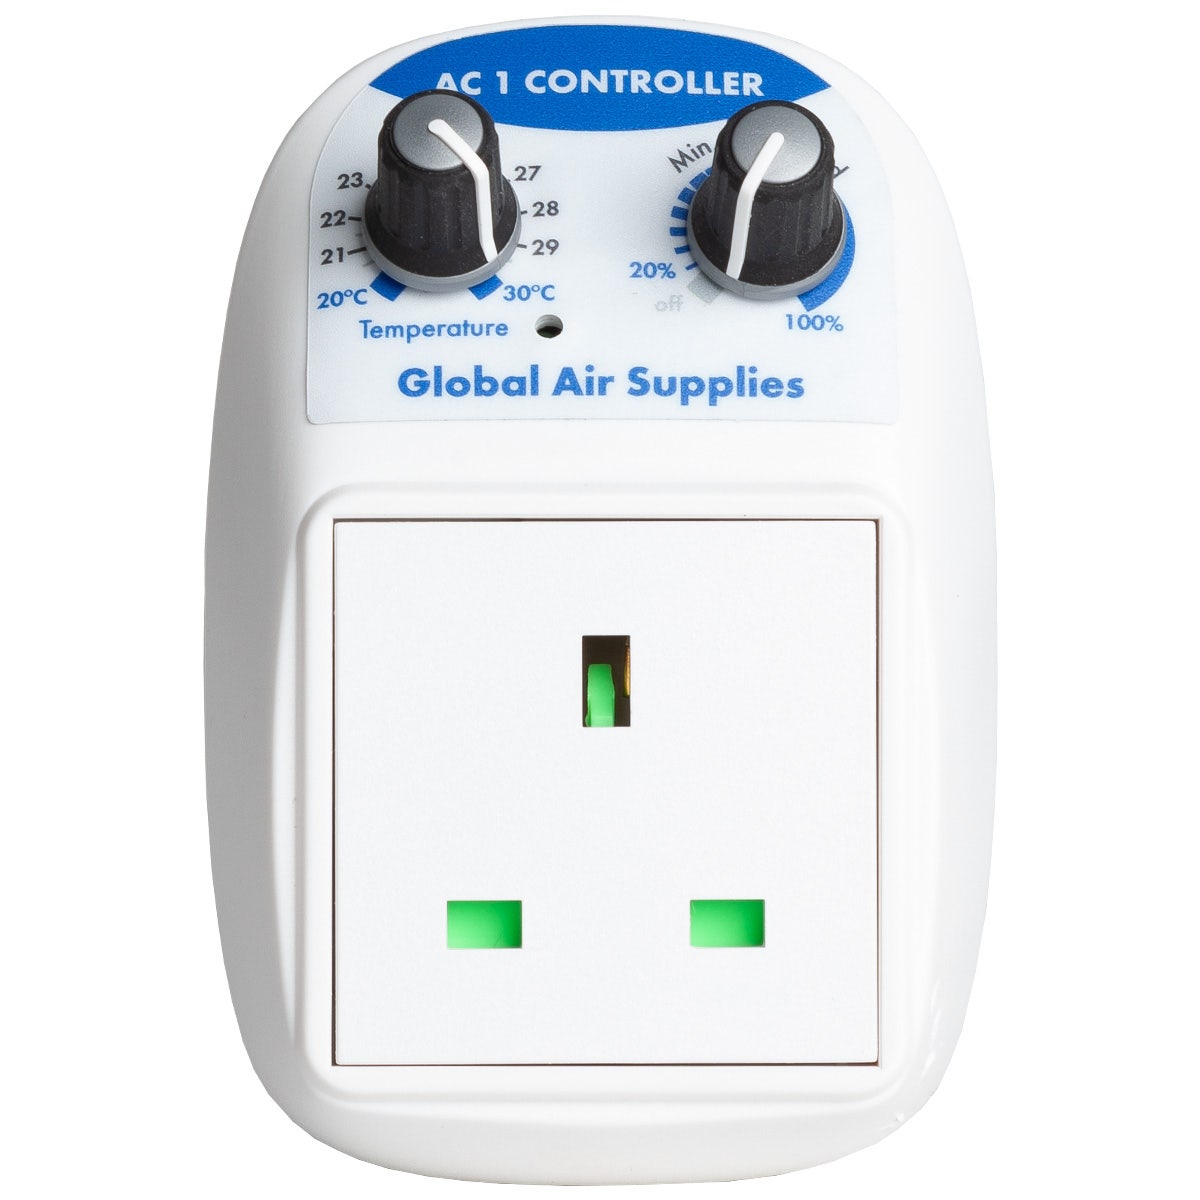 G.A.S AC1 Thermostatic Fan Speed Controller